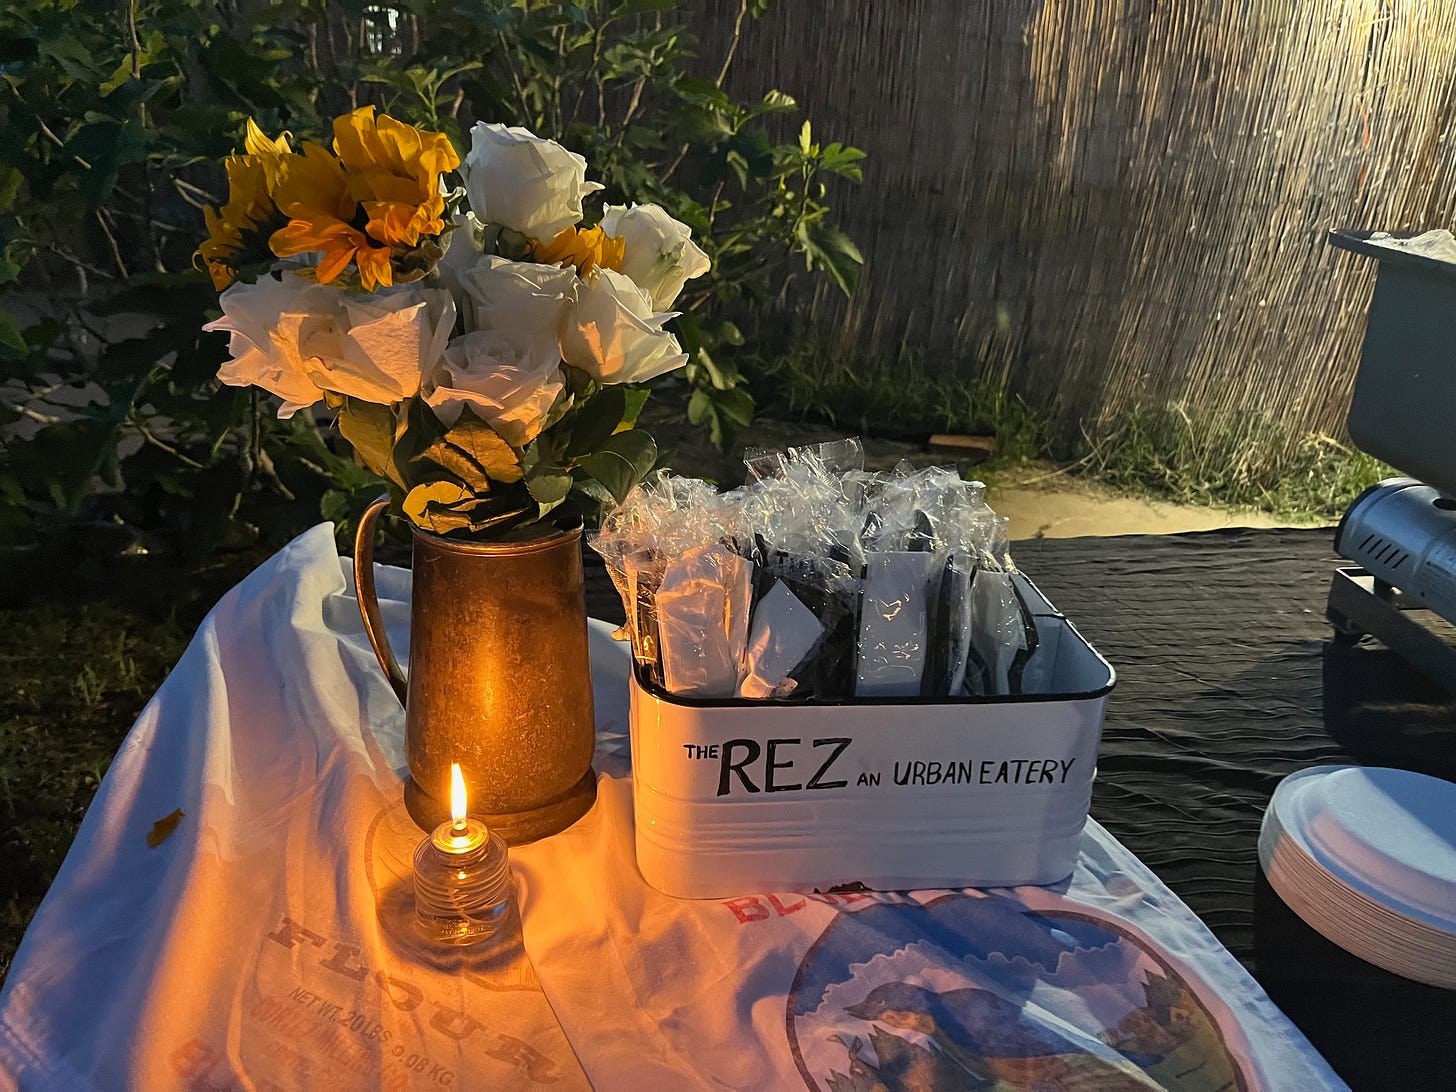 The Rez An Urban Eatery's catering table at the event with sunflowers and roses and candles